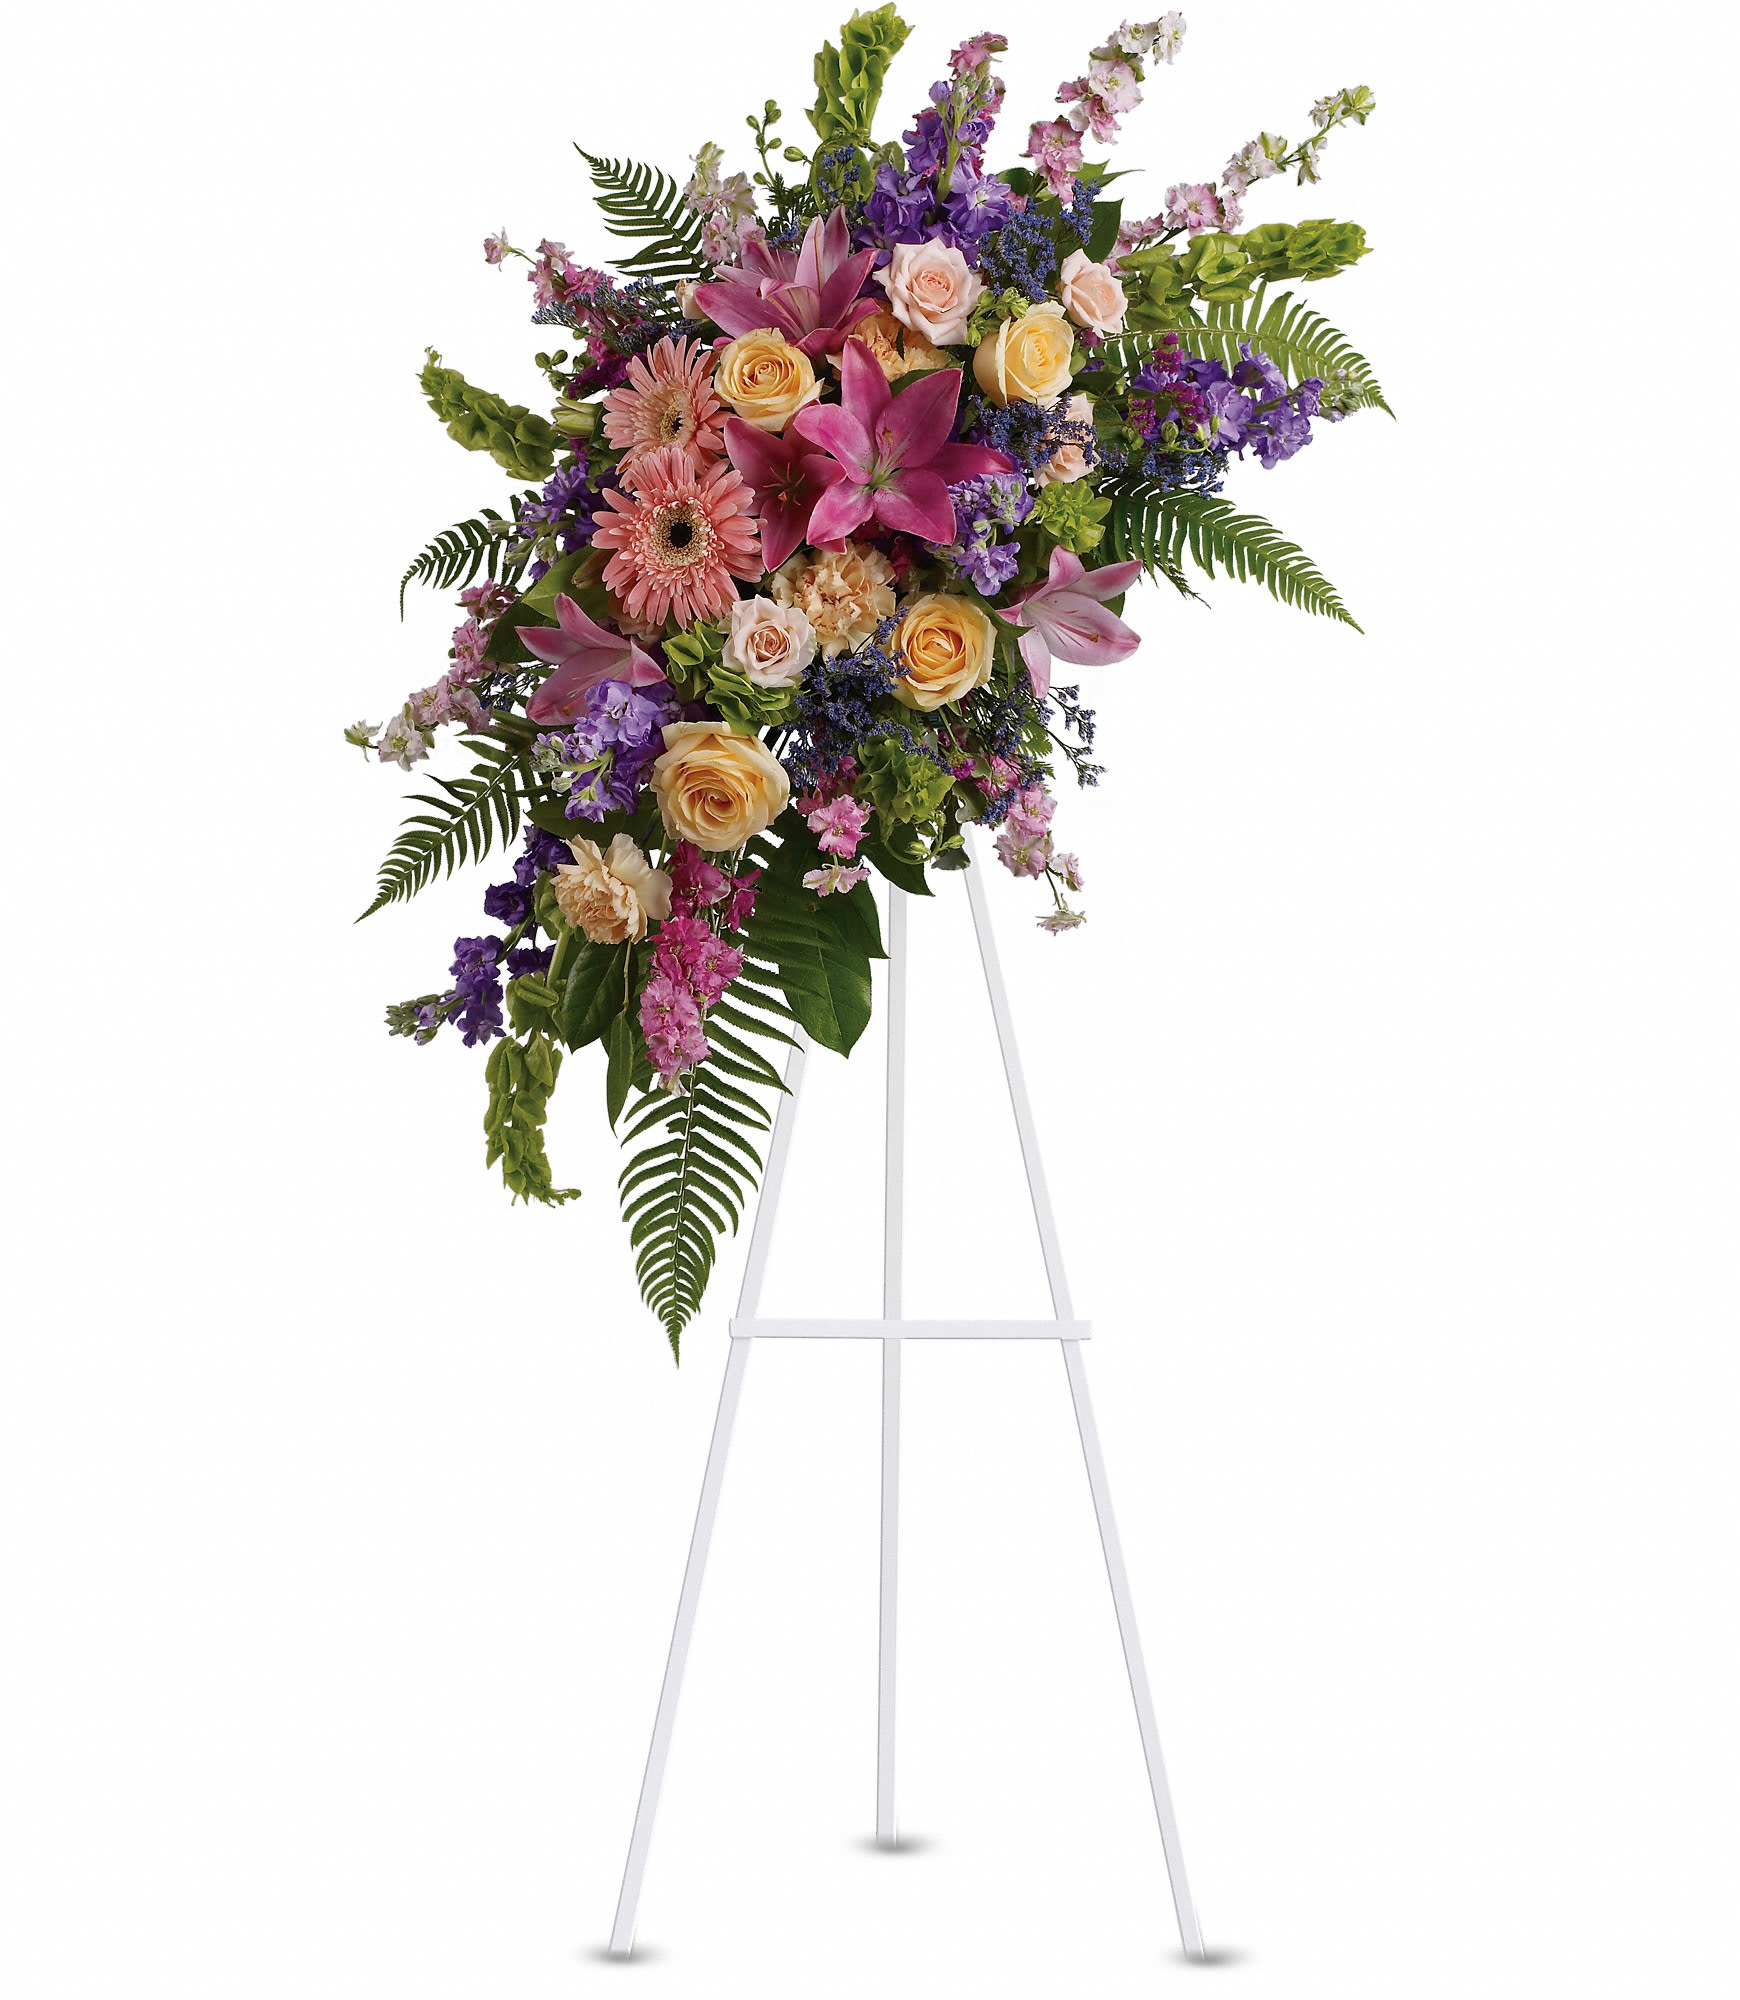 Heavenly Grace Spray - A sublime garden of rich yet subtle hues is a touching tribute to a lifetime of memories and special moments as varied and dear as this palette of blooms. 